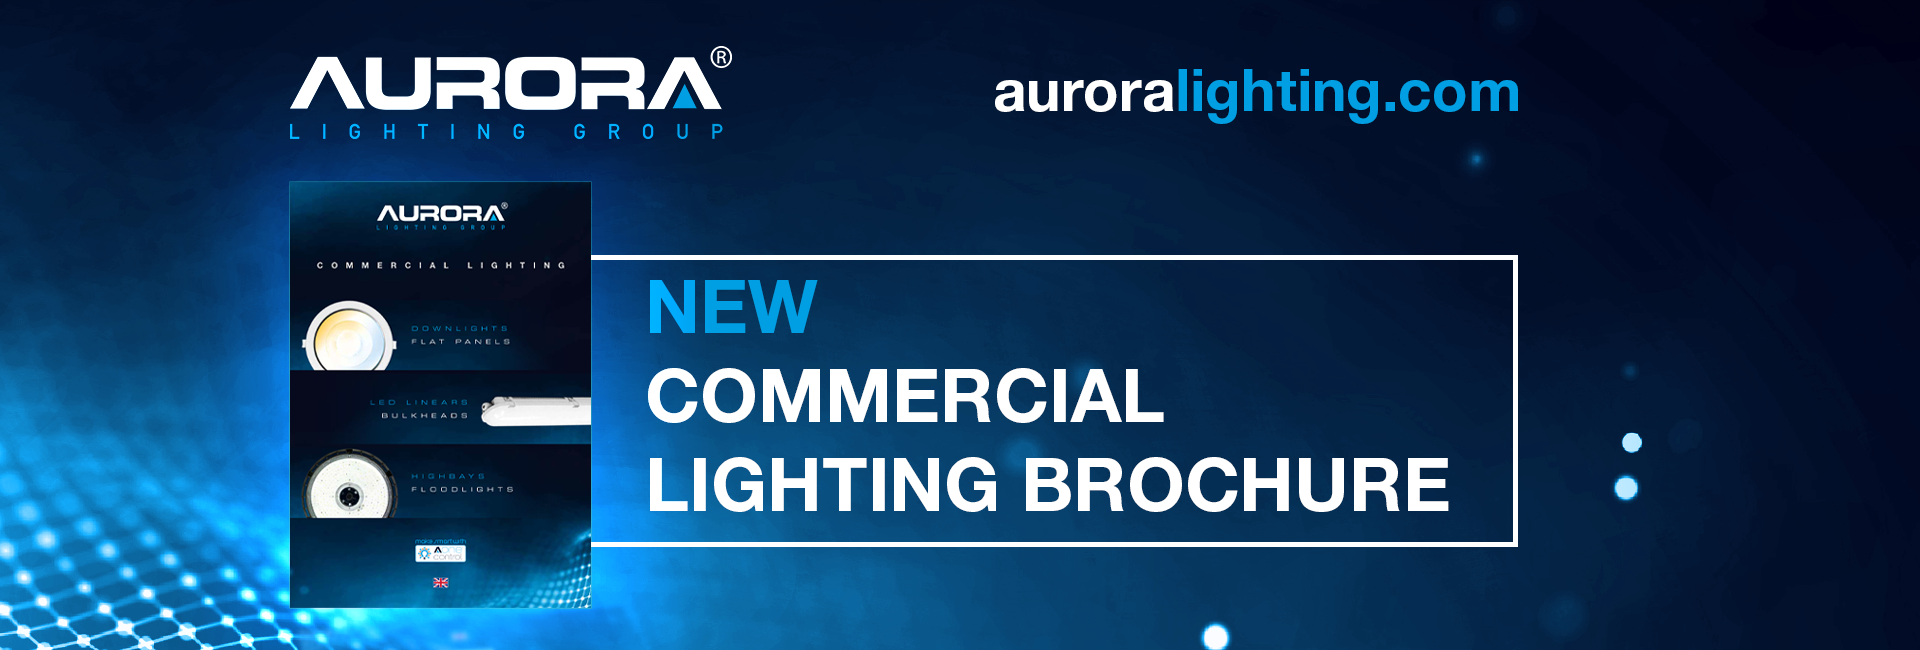 Show products in category New Commercial Lighting Brochure by Aurora